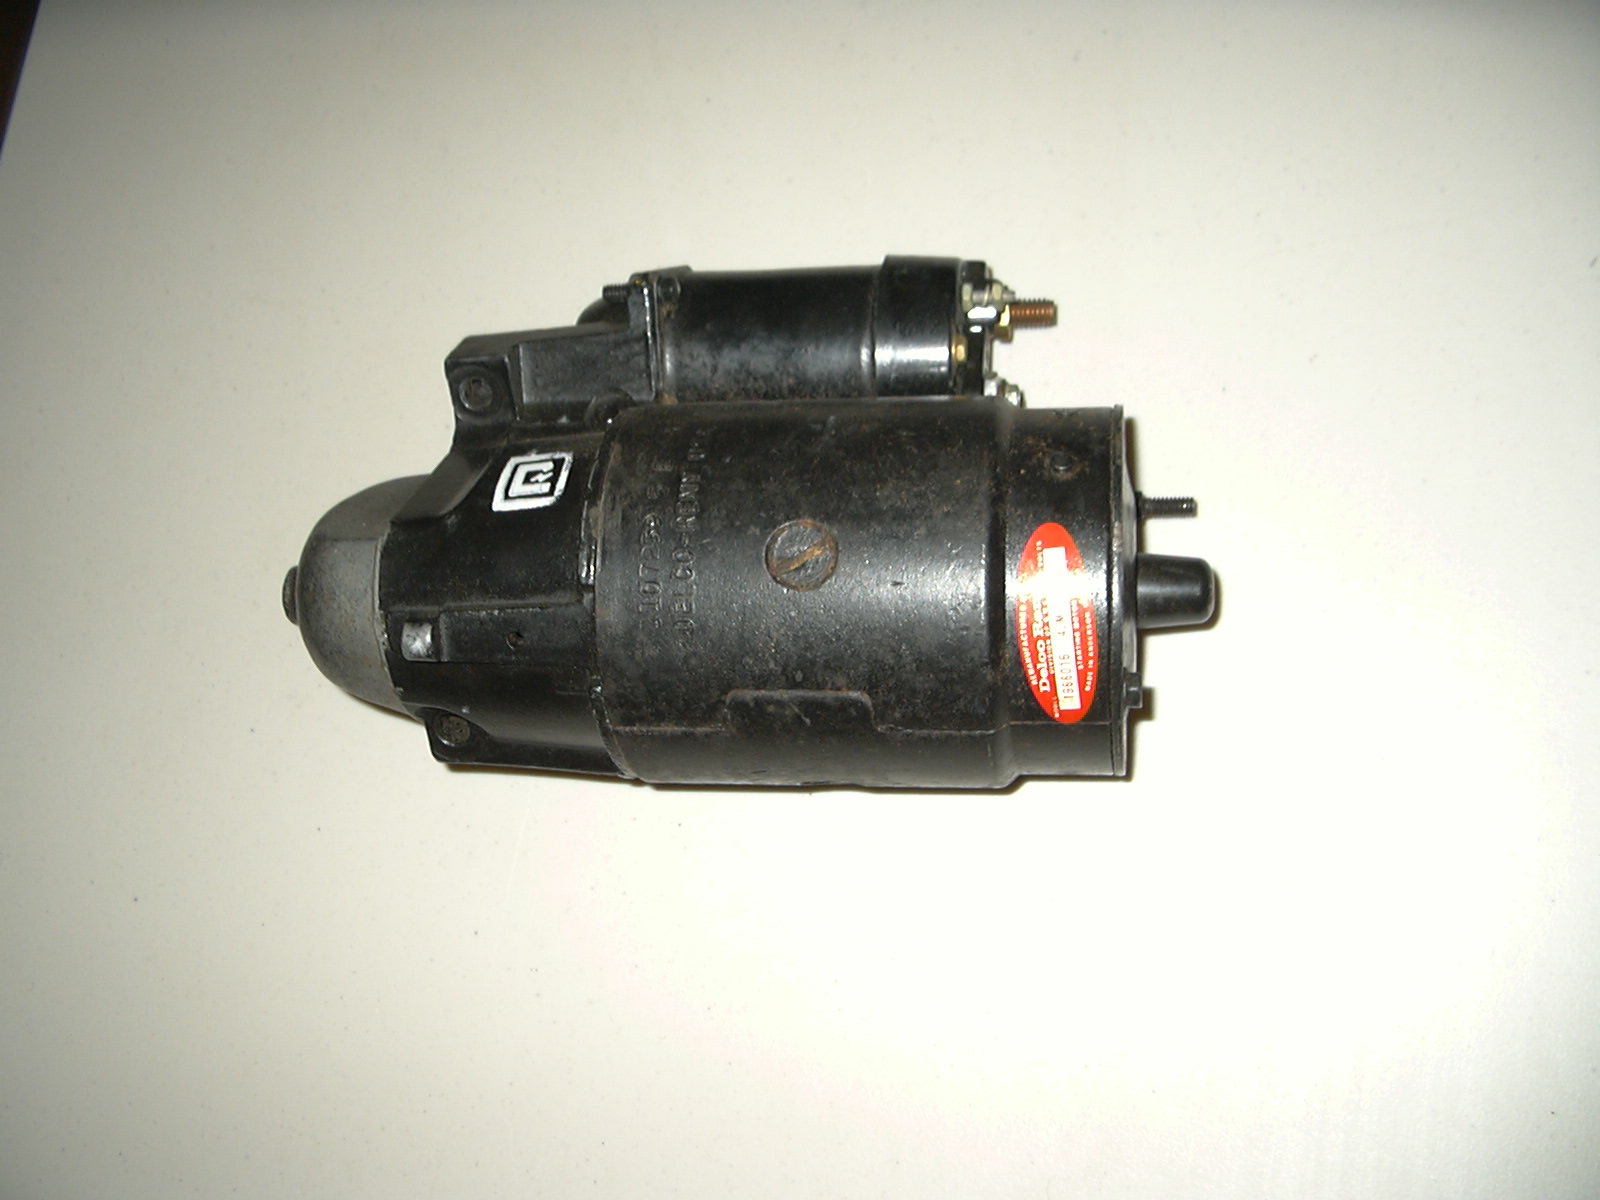 1962-1965 GM Engine Starting Motor Re-manufactured by Delco Remy # 1107260